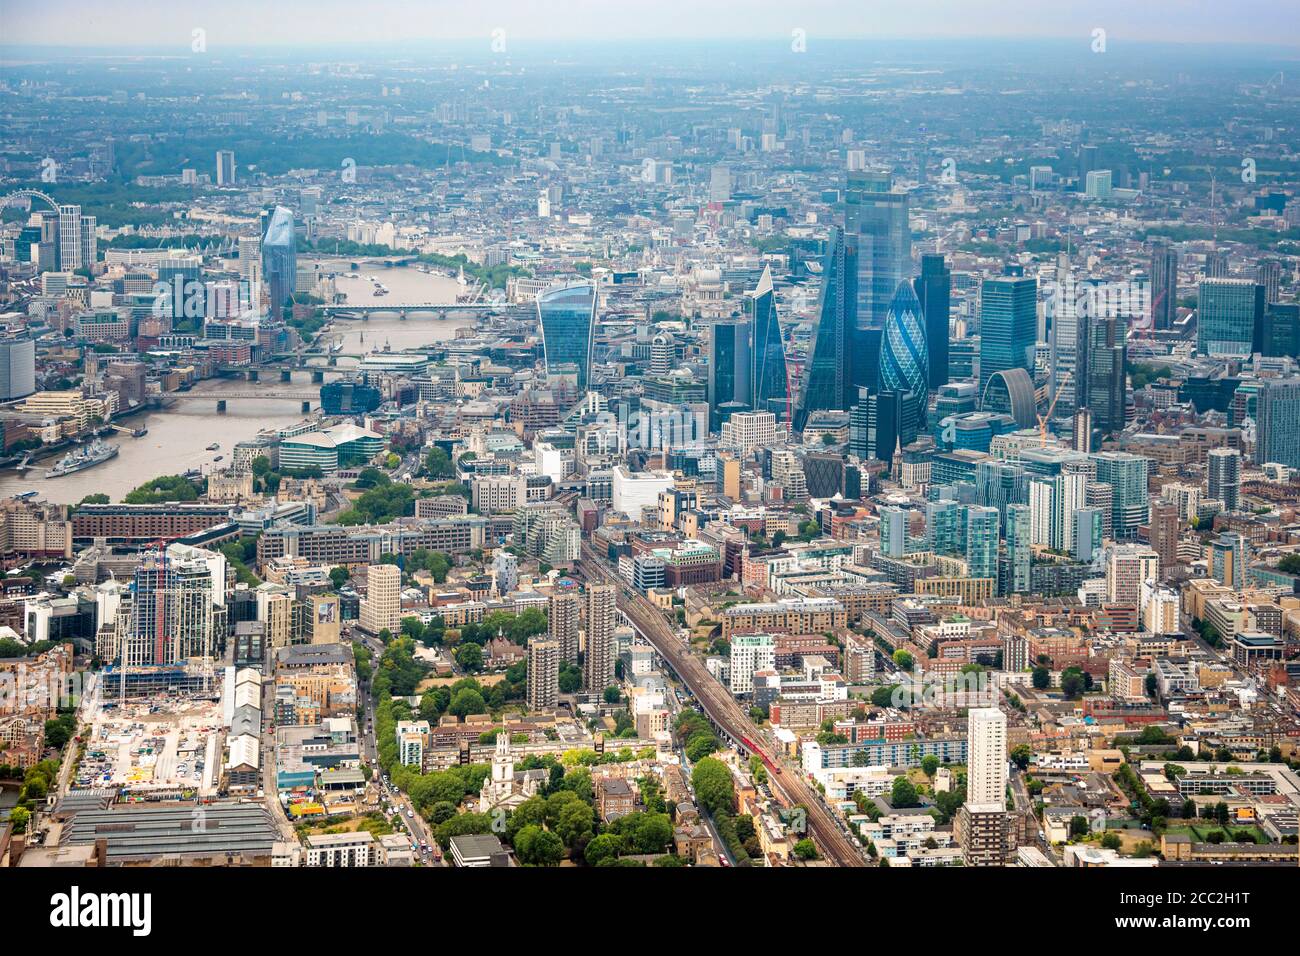 Horizontal aerial view looking west from the City of London towards the Embankment over London. Stock Photo